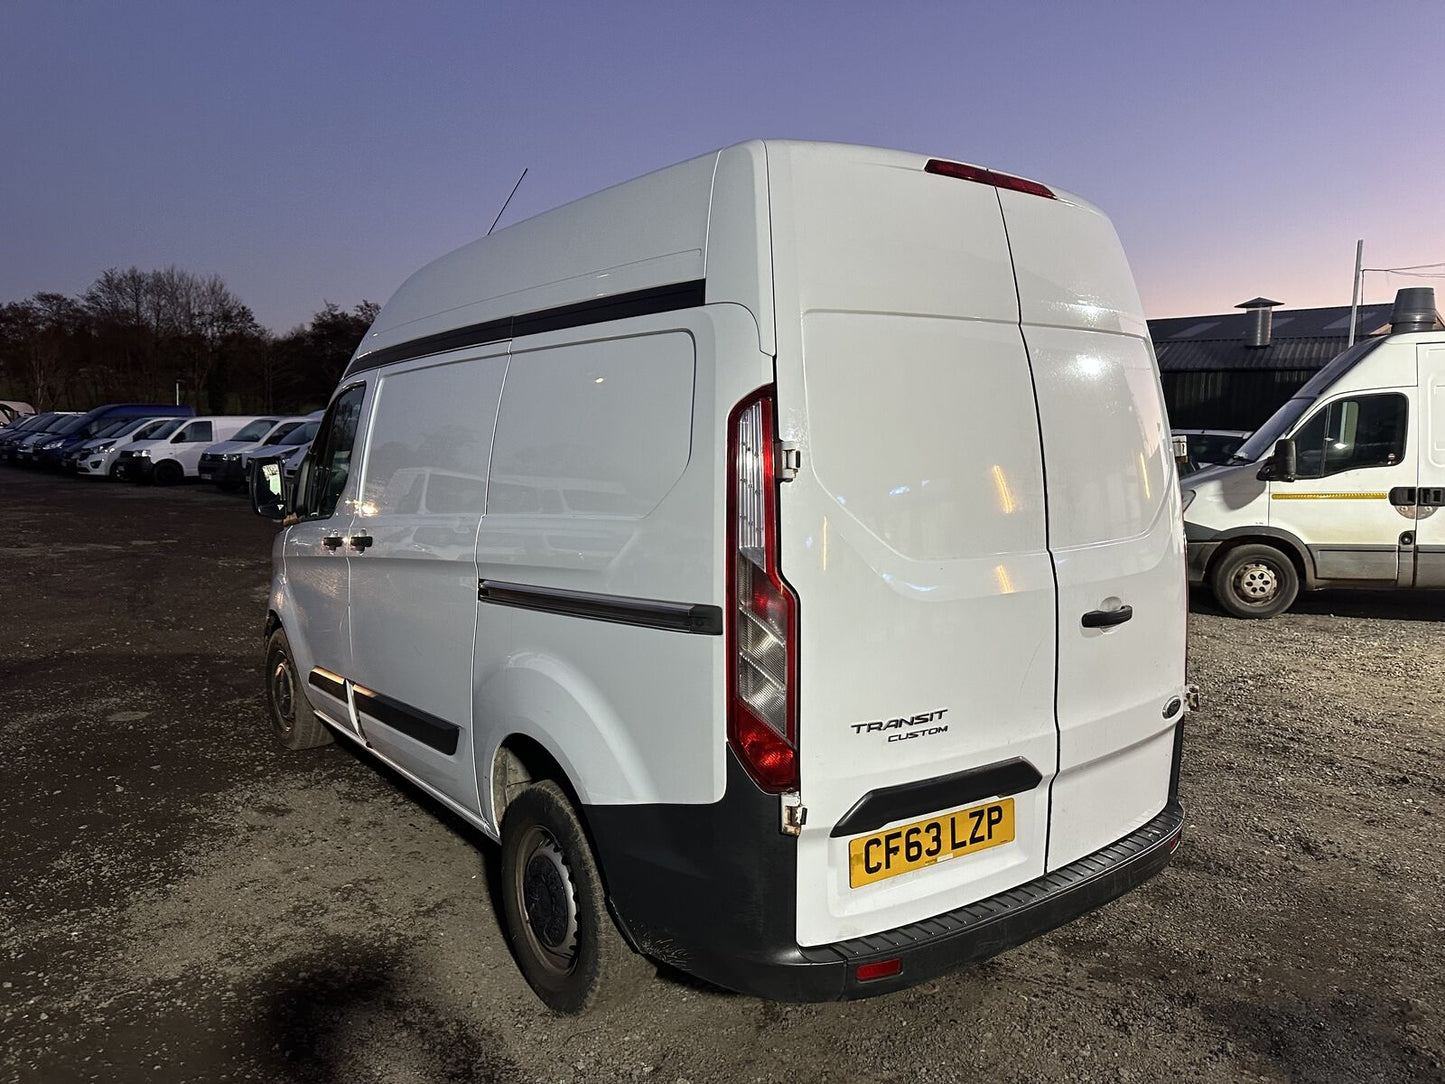 Bid on DIESEL POWERHOUSE: FORD TRANSIT CUSTOM 270 IN CRISP WHITE- Buy &amp; Sell on Auction with EAMA Group